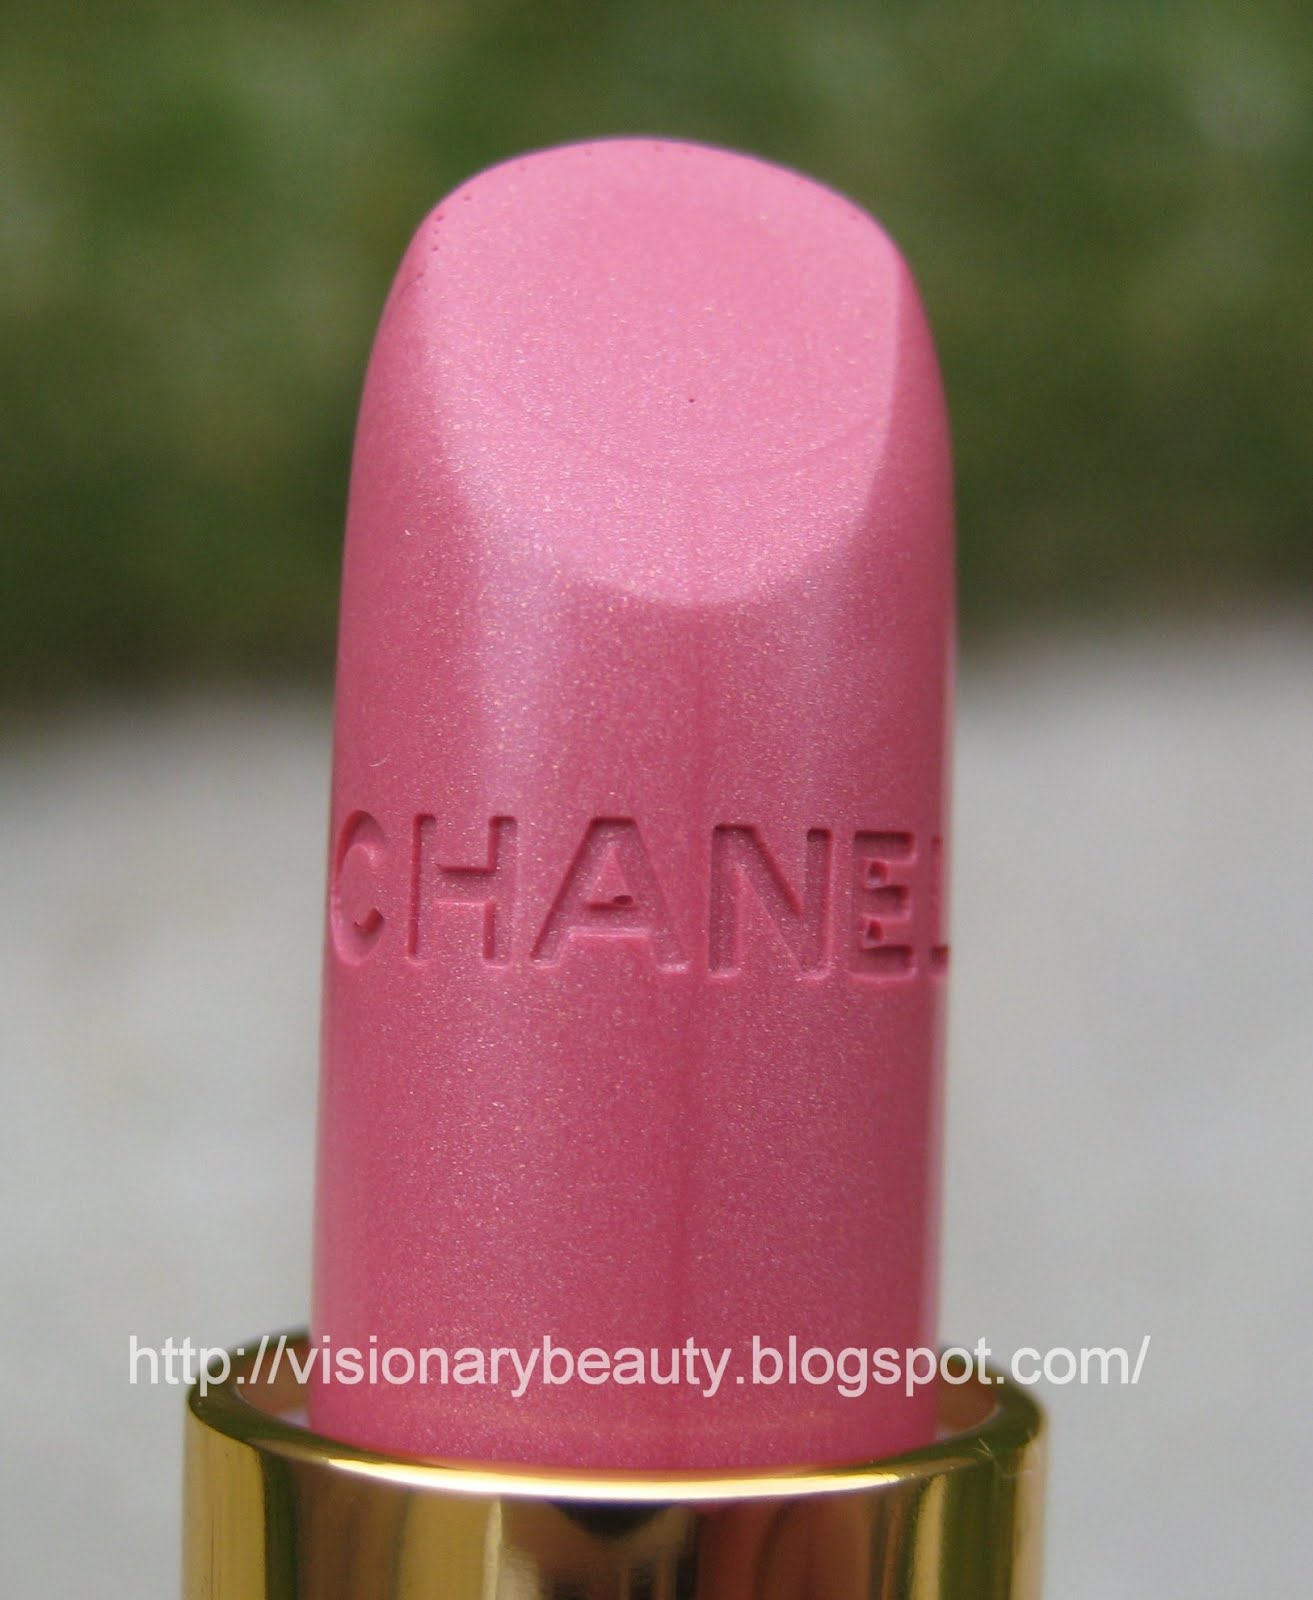 Visionary Beauty: Chanel Charme & Superstition Rouge Coco